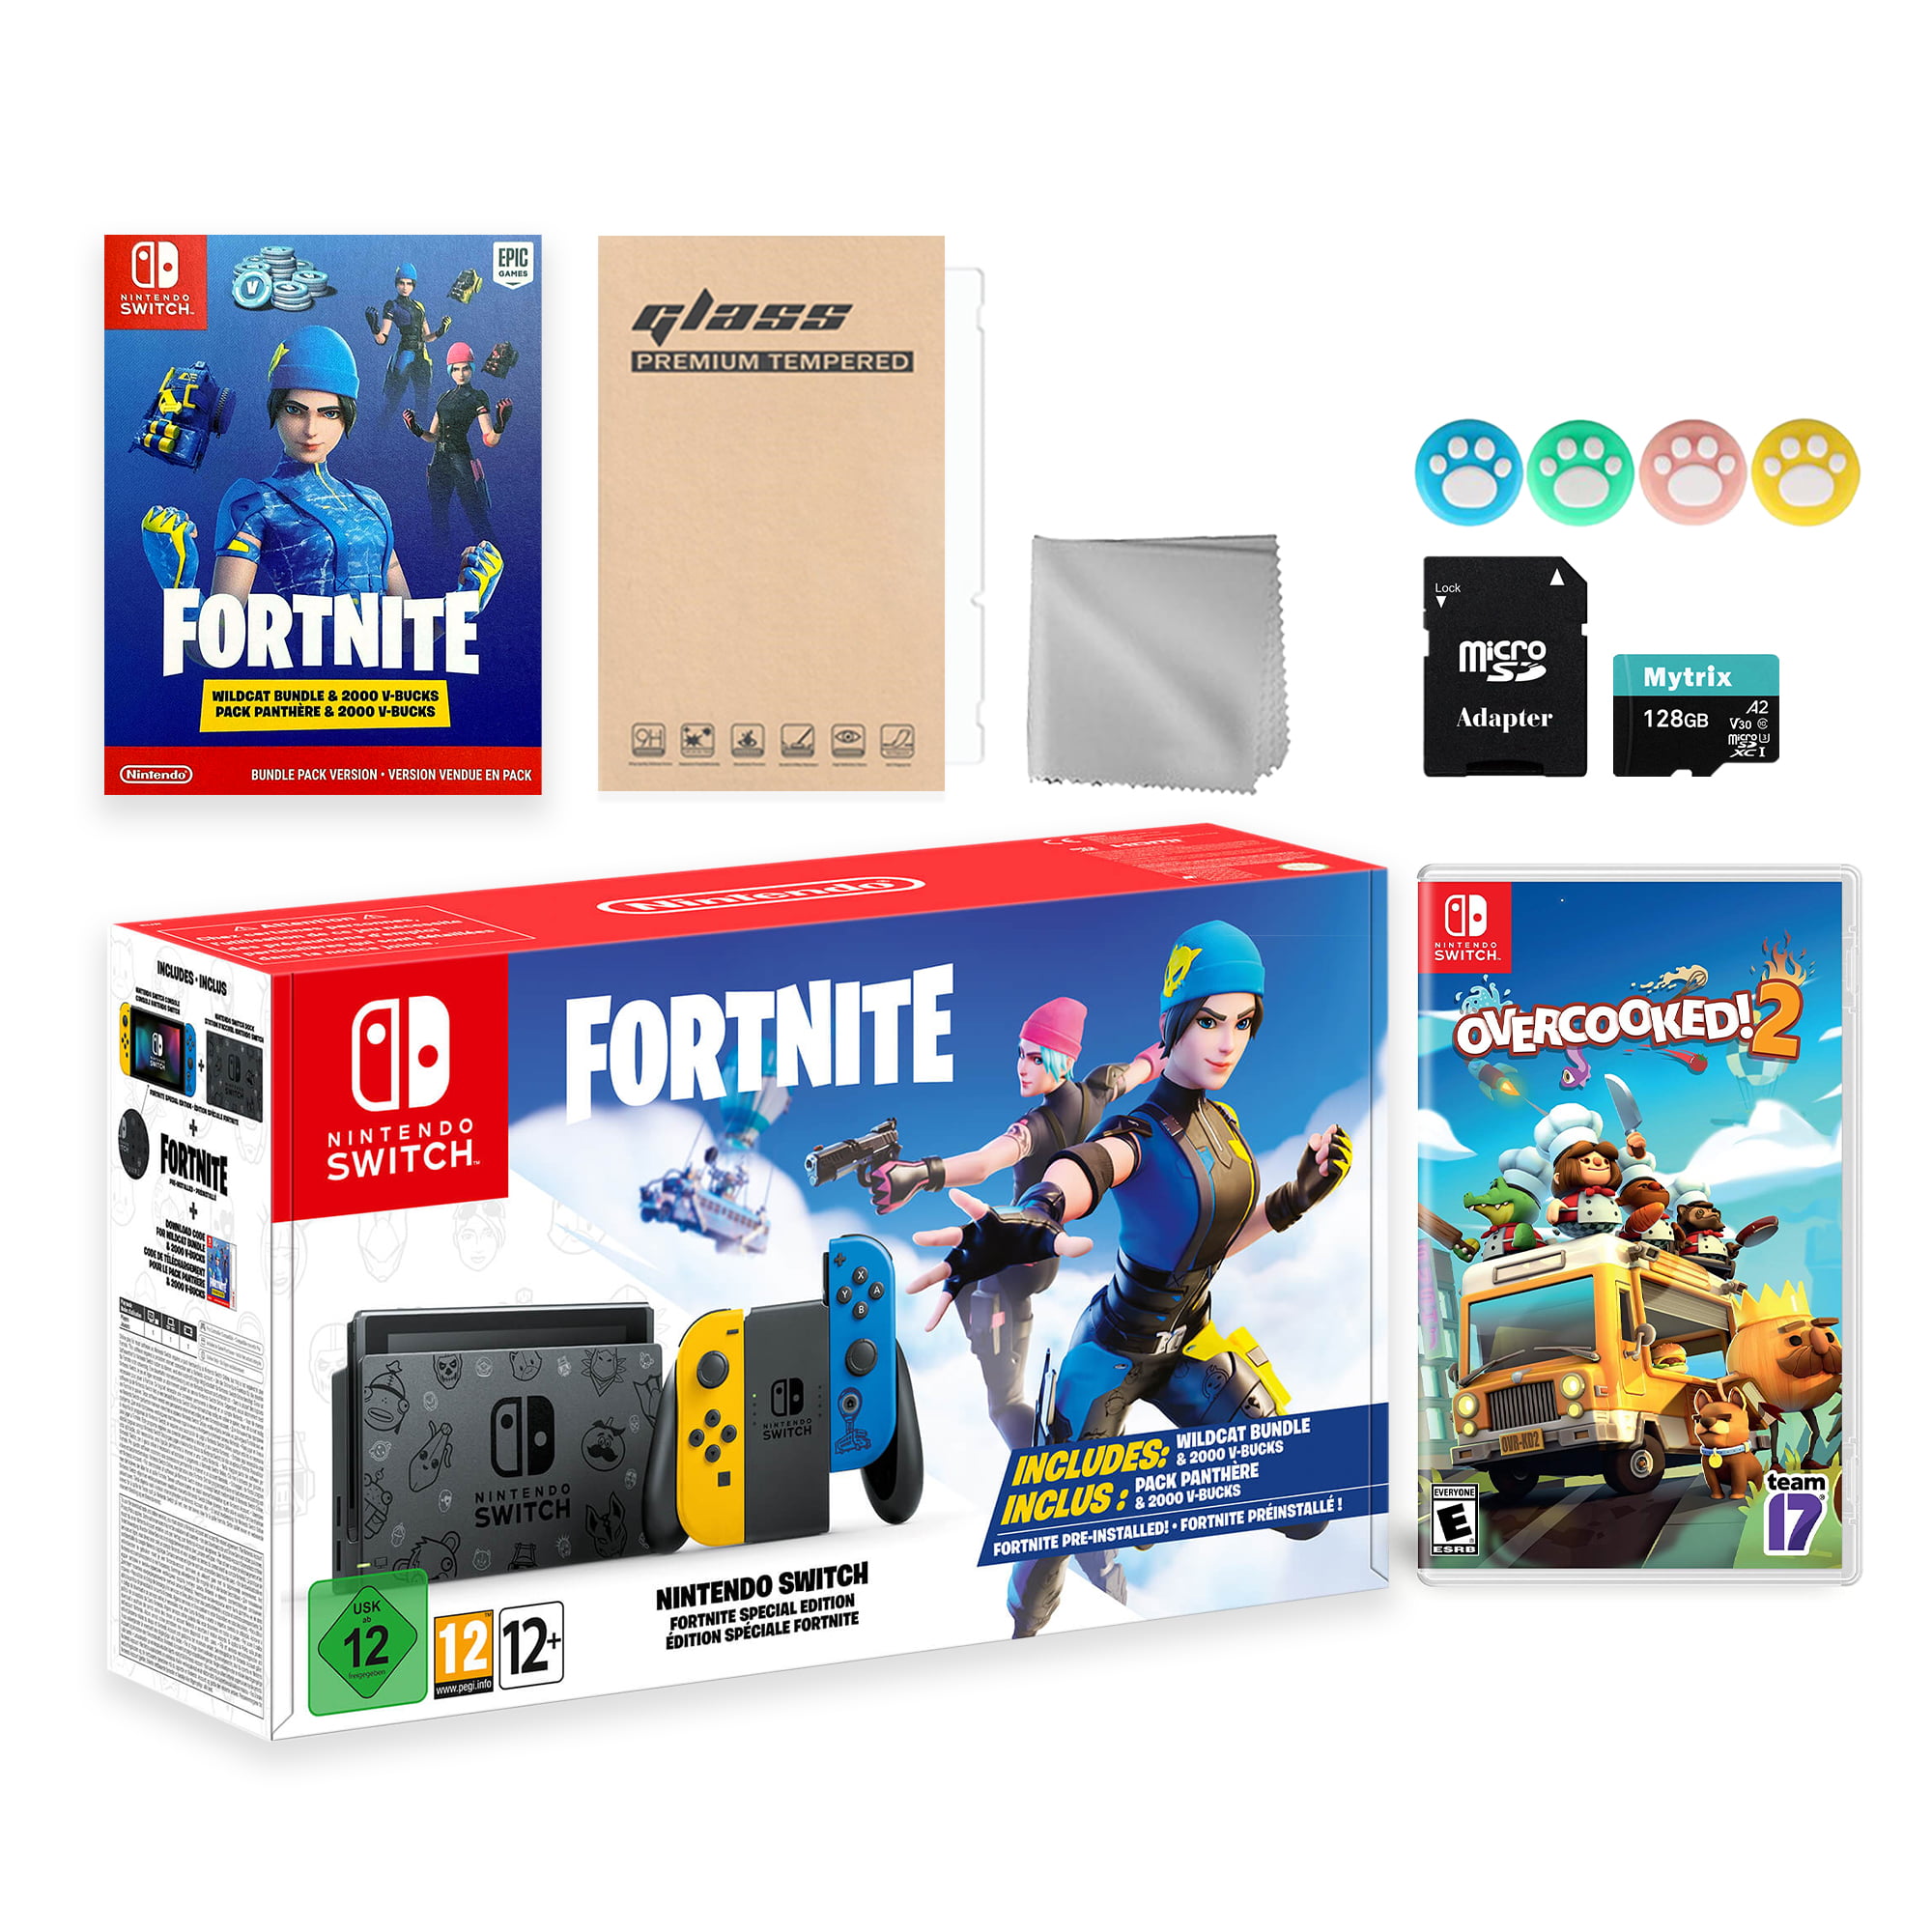 Nintendo Switch Fortnite Wildcat Limited Console Set Epic Wildcat Outfits 00 V Bucks Bundle With Overcooked 2 And Mytrix Accessories Walmart Com